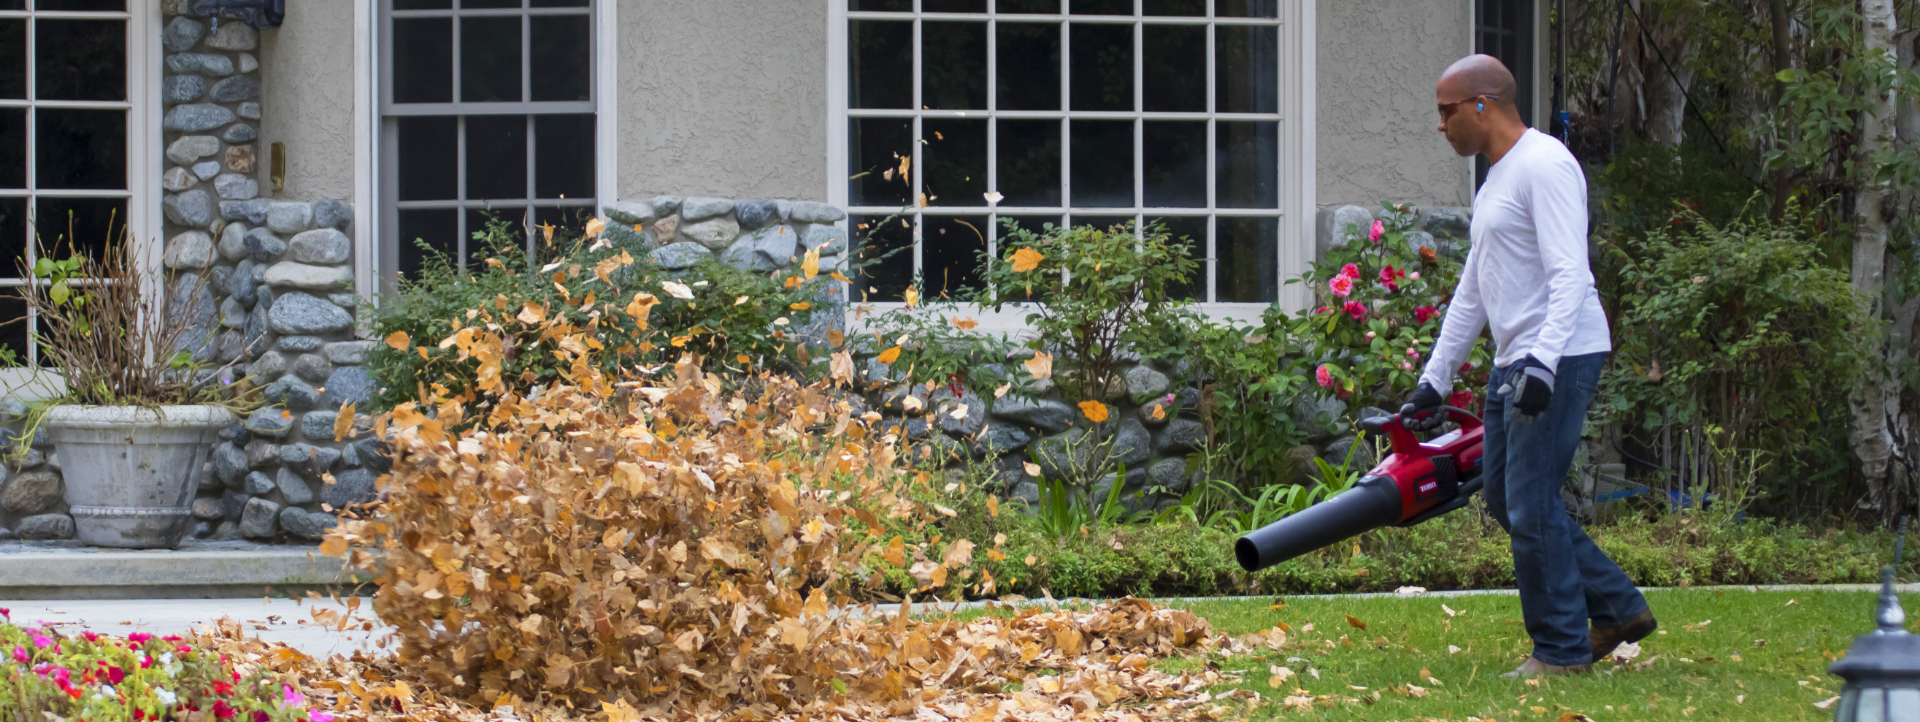 Man blowing leaves in front of house with a Toro blower